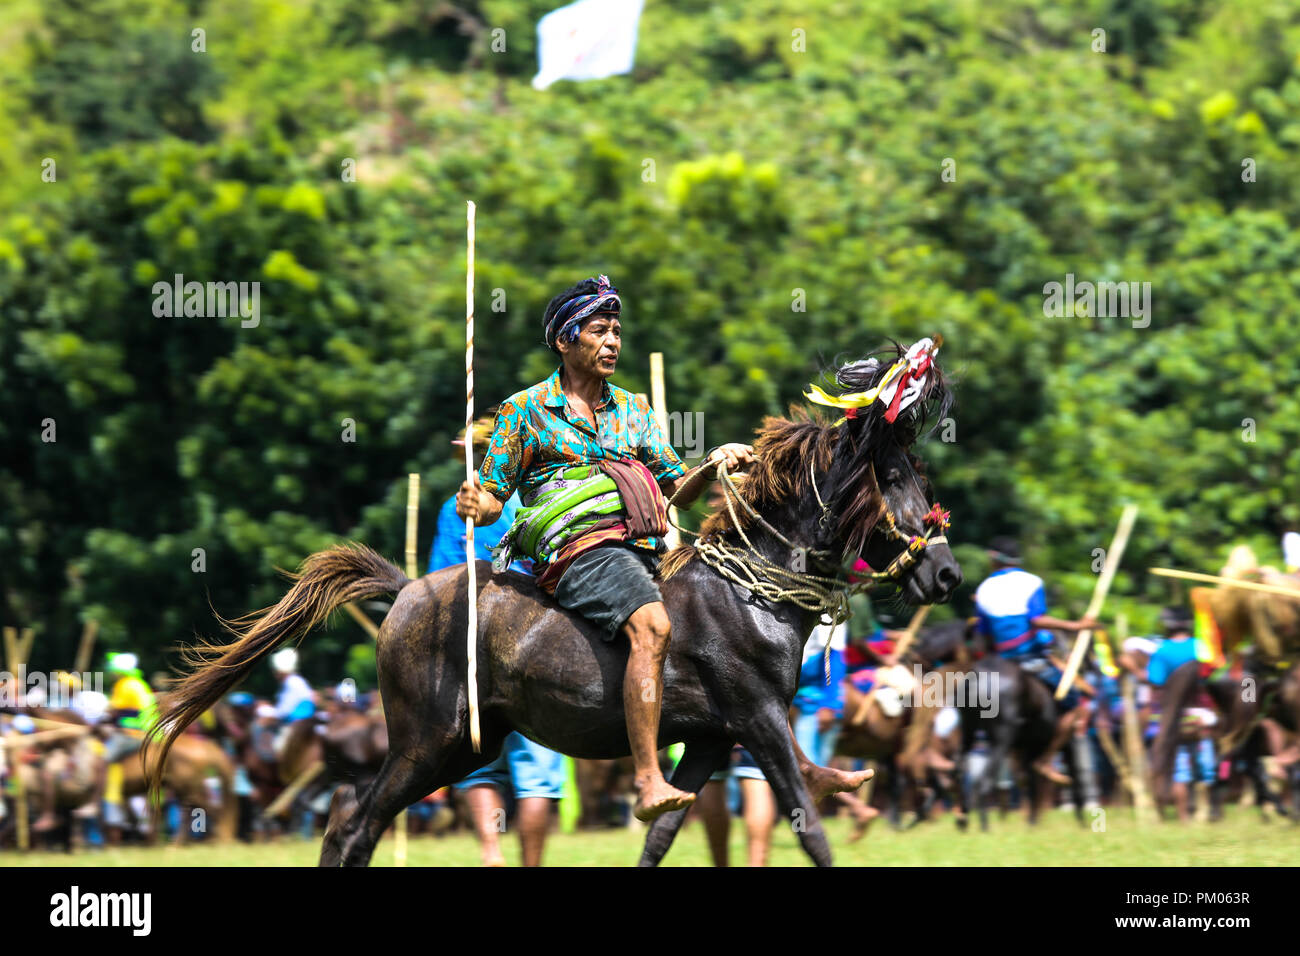 Pasola, Indonesian traditional ceremonies involving young knights riding horses Stock Photo